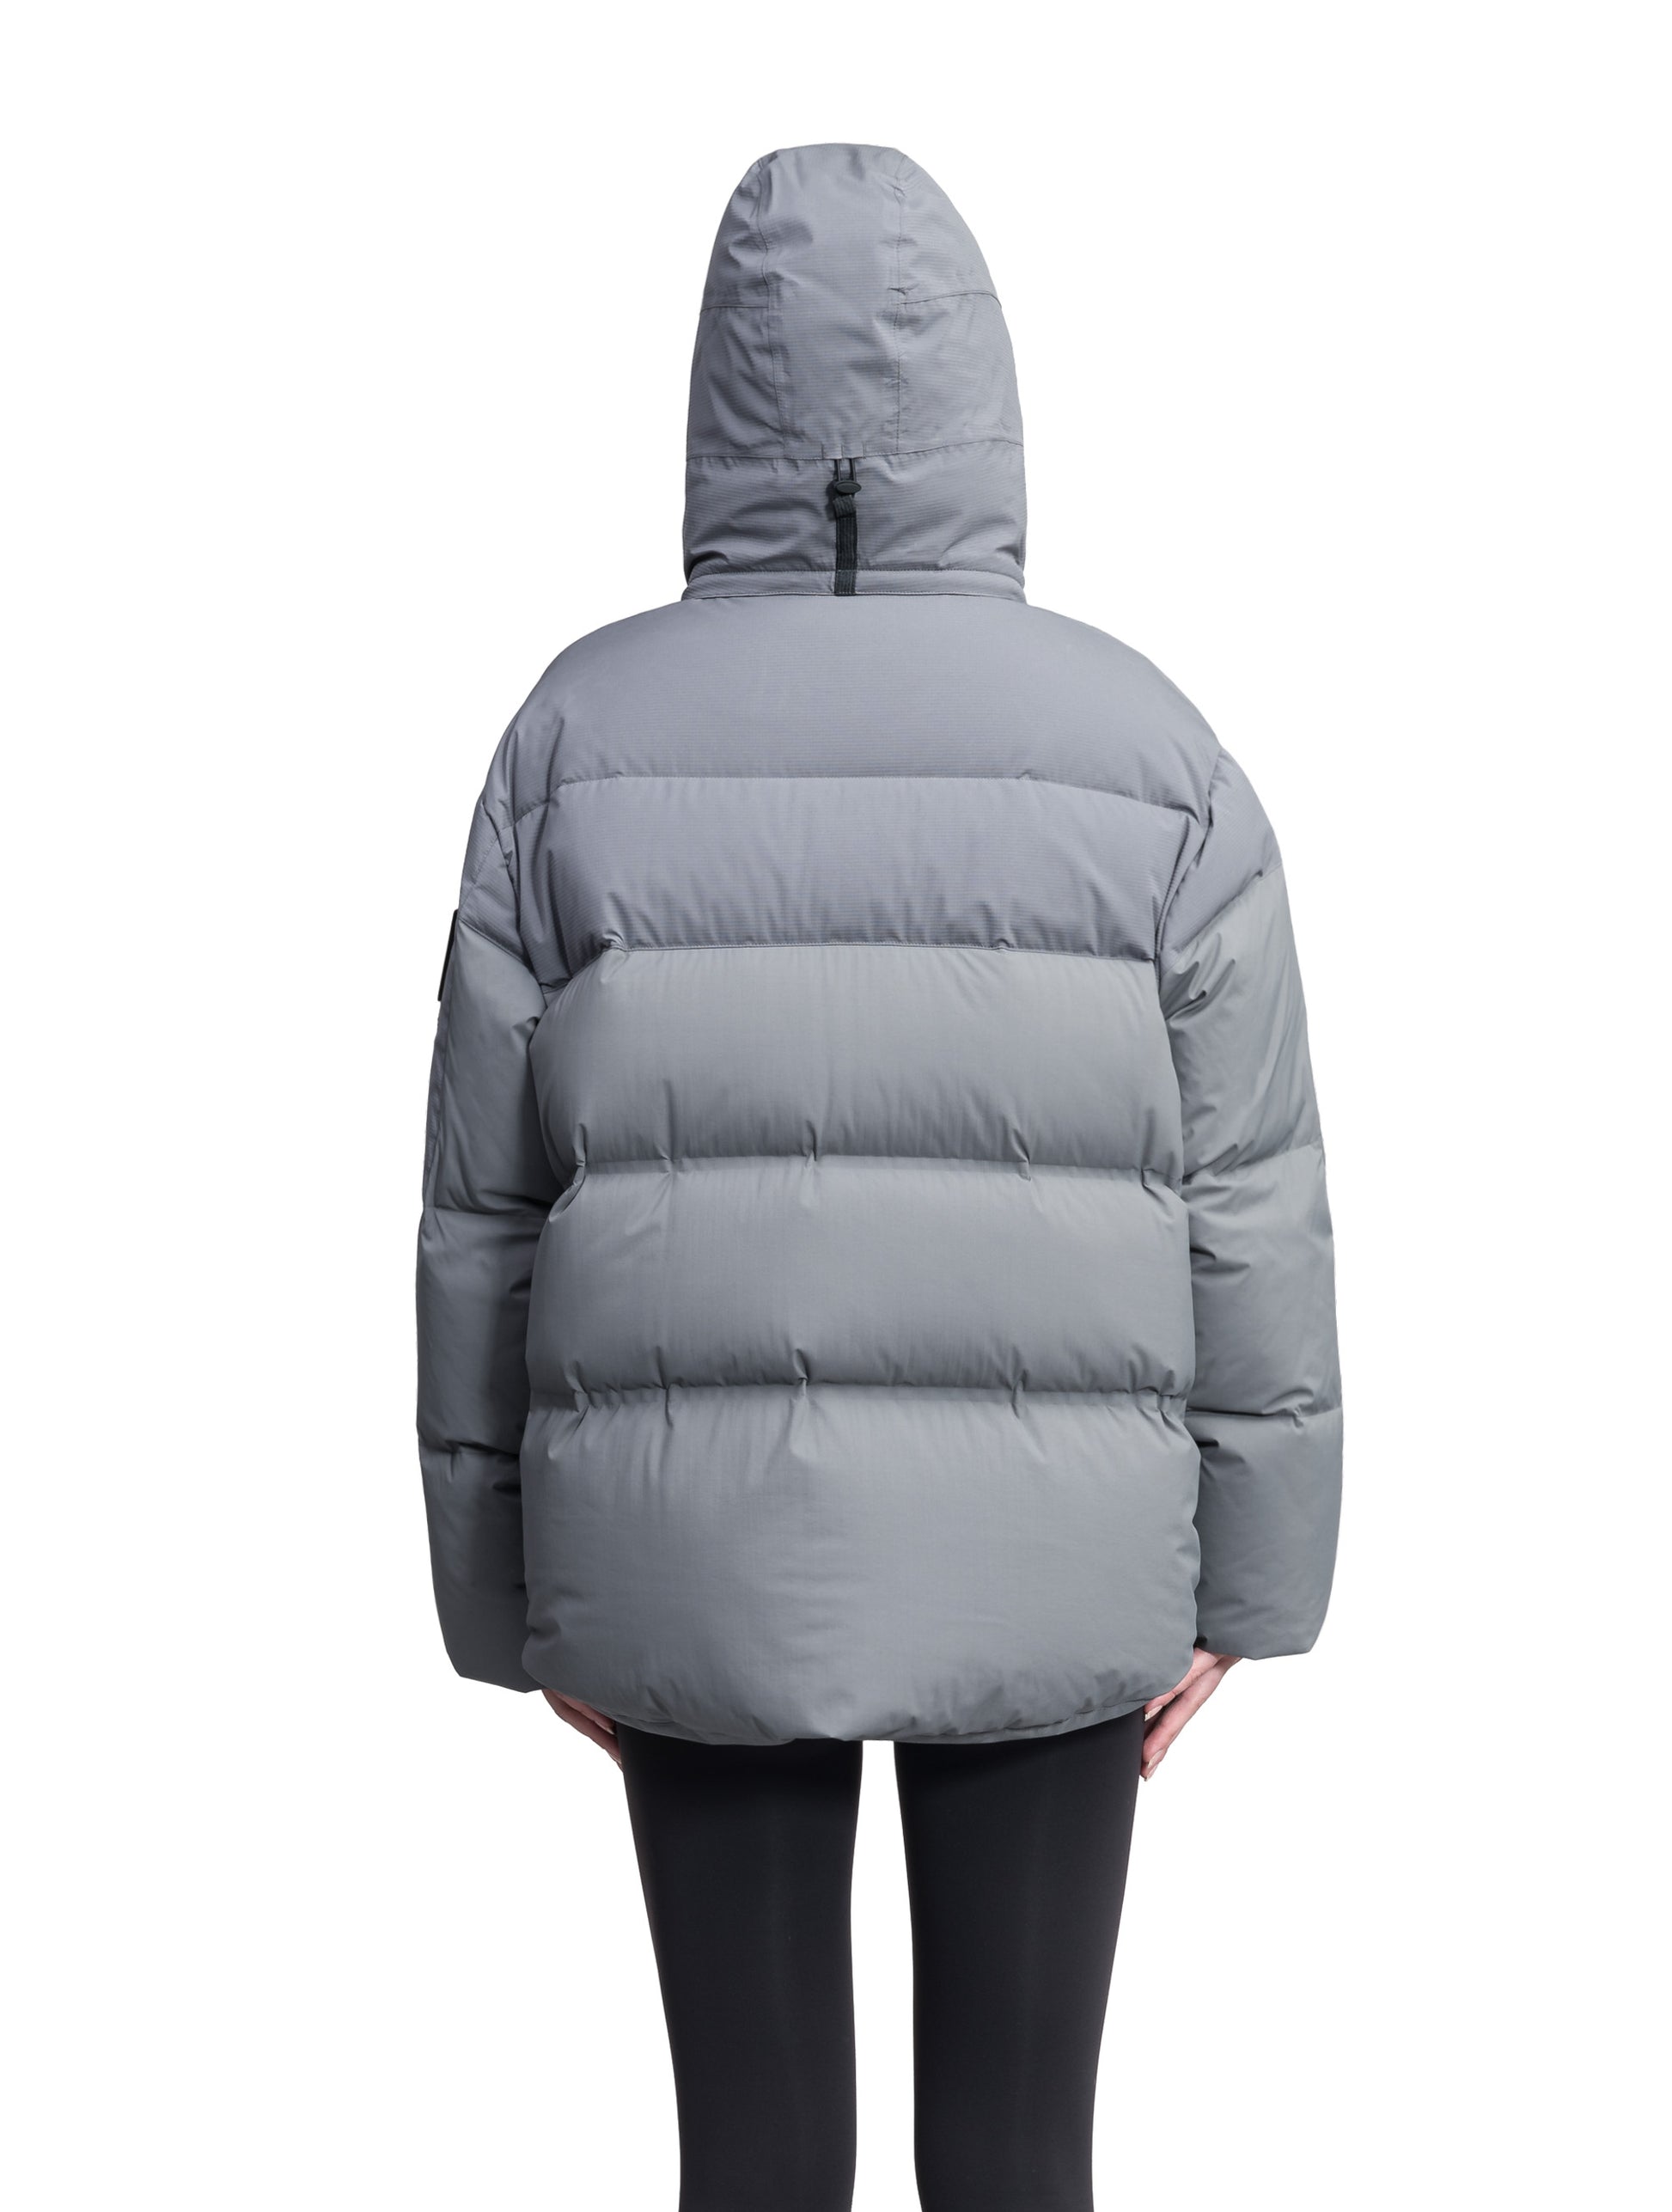 Una Ladies Performance Puffer in hip length, Technical Taffeta and Durable Stretch Ripstop fabrication, Premium Canadian White Duck Down insulation, removable down filled hood, centre front two-way zipper, and side-entry pockets at waist, in Concrete